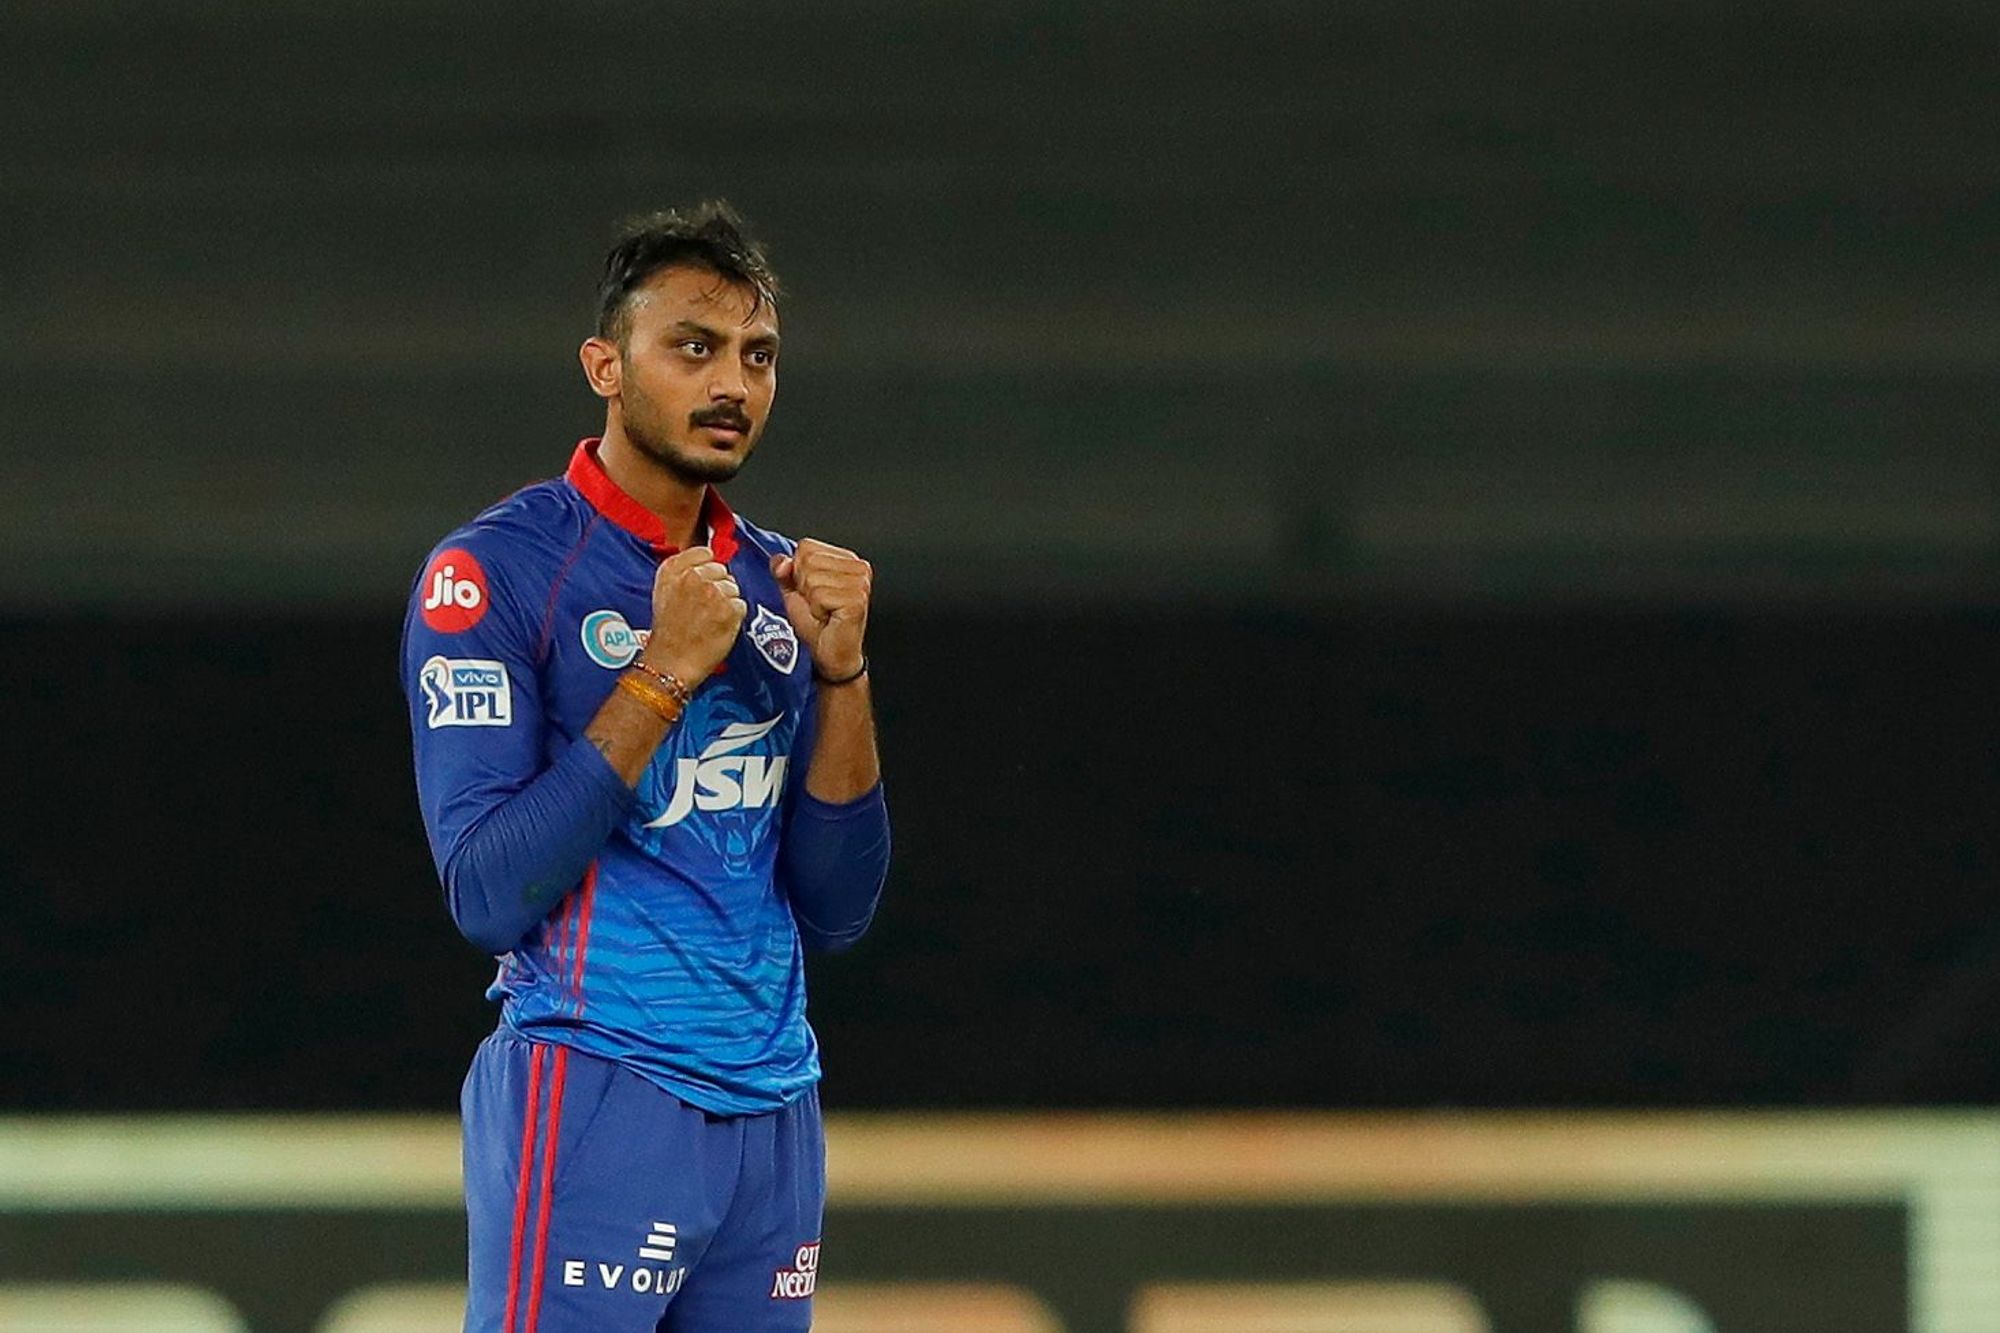 Akshar Patel snared two wickets against CSK | BCCI/IPL